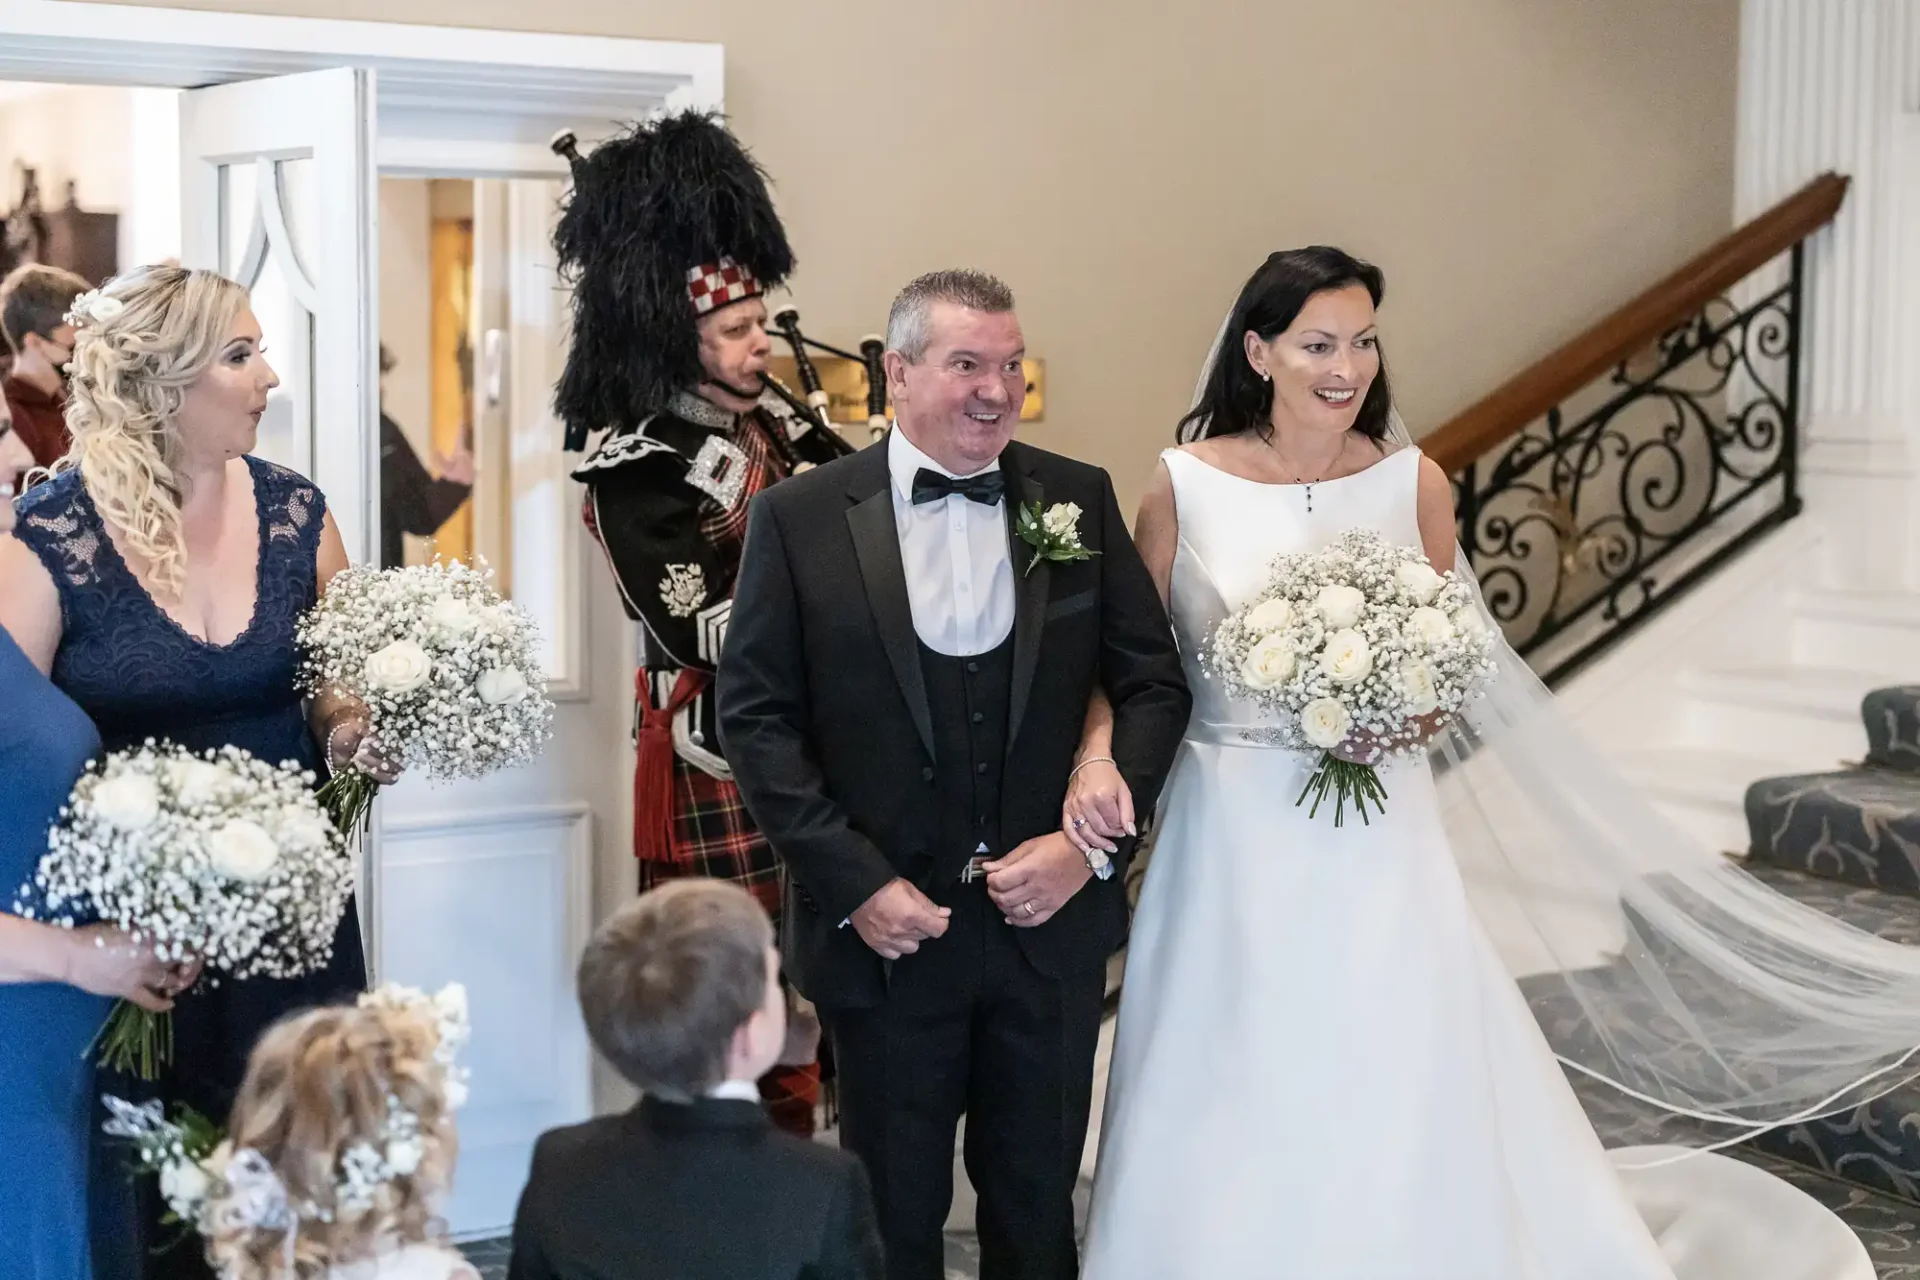 A bride and groom walk down stairs at their wedding, accompanied by a bagpiper in traditional scottish attire, with guests looking on.